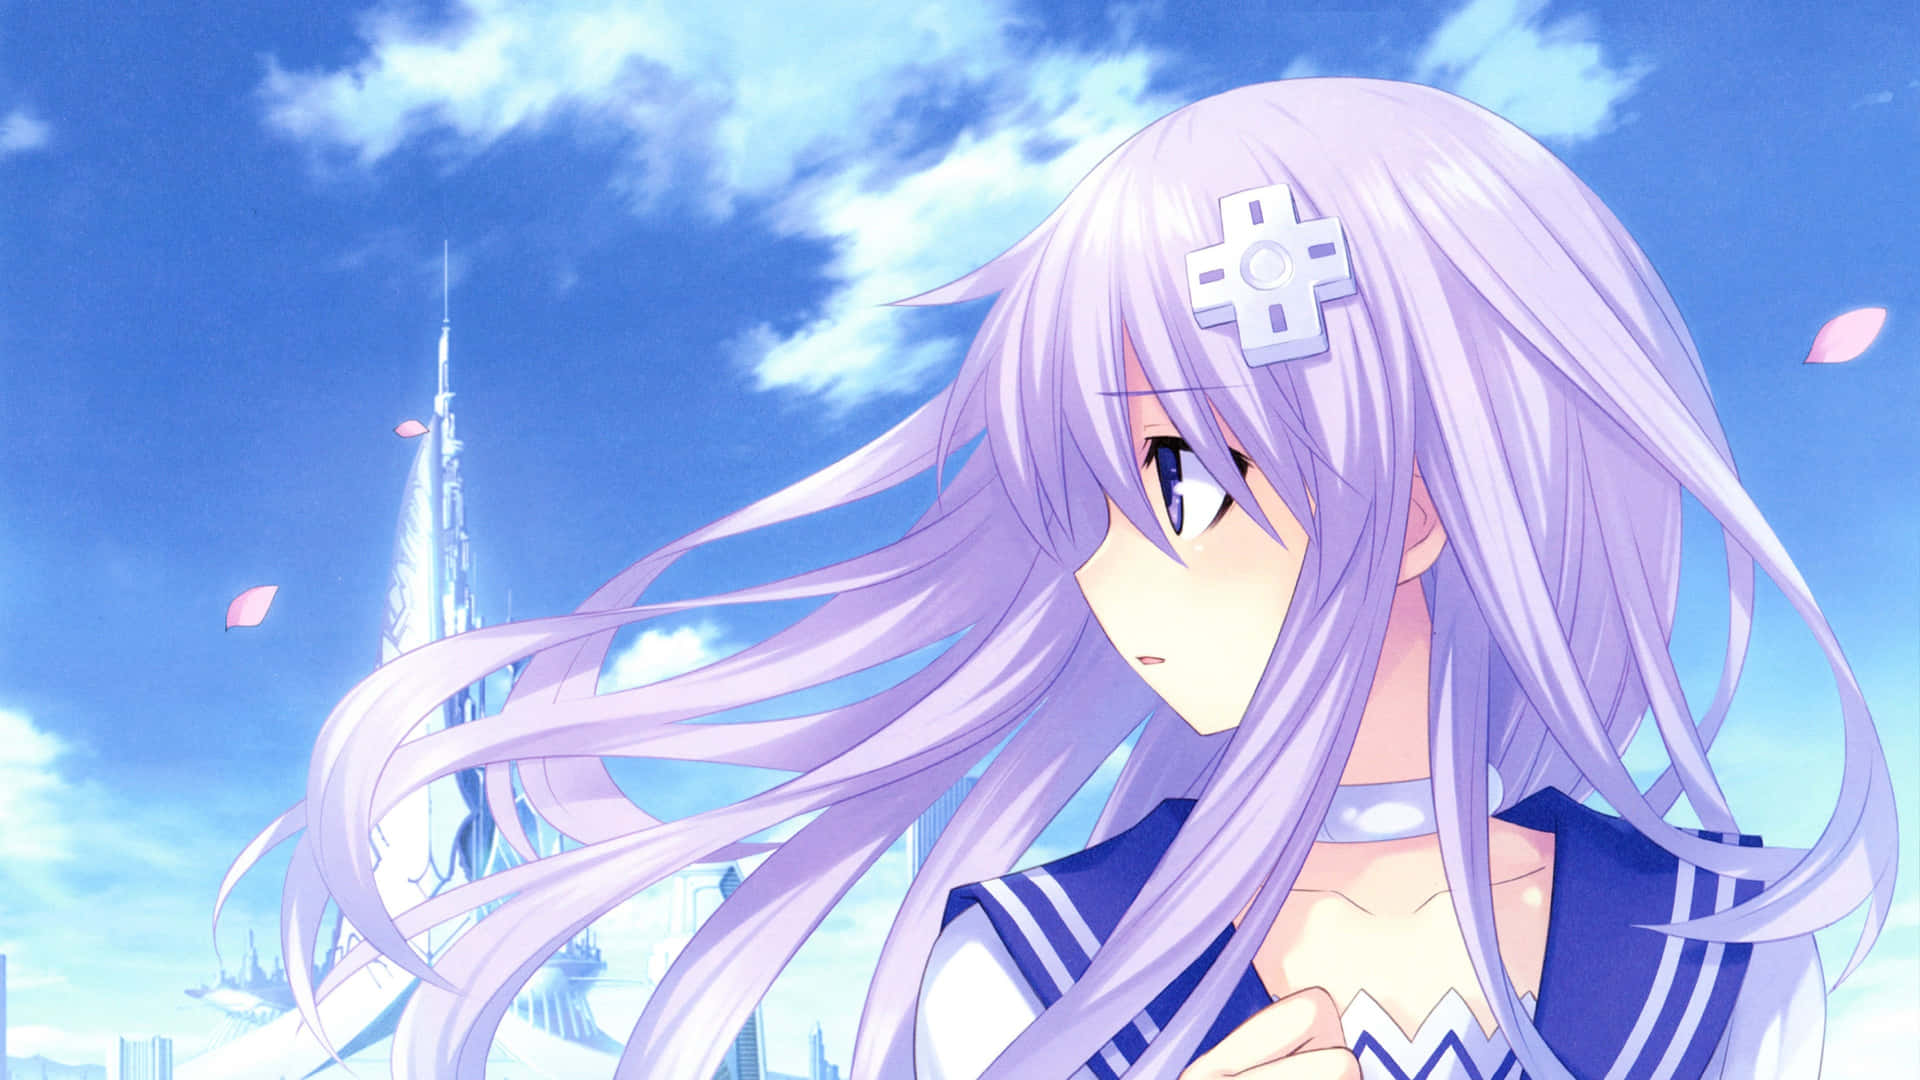 a girl with long purple hair is standing in front of a city Wallpaper